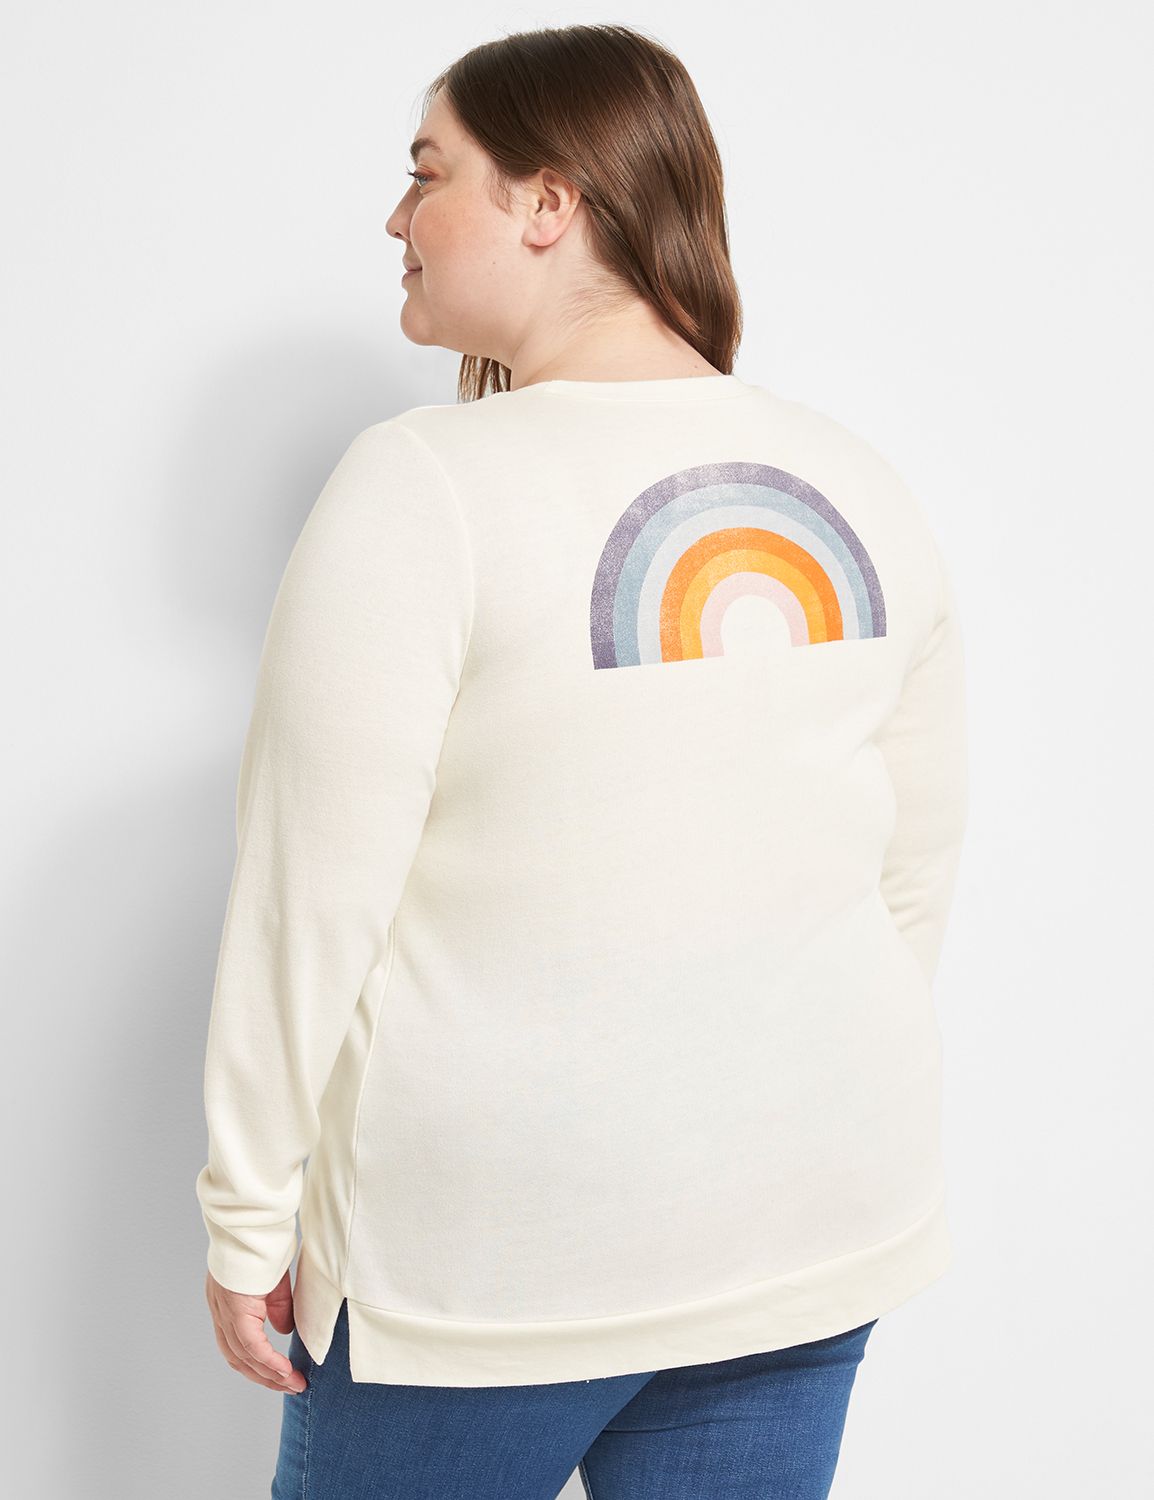 Lane Bryant - Every color in the rainbow looks good on you! Shop our Pride  Collection bright now. 🌈 #Pride Shop